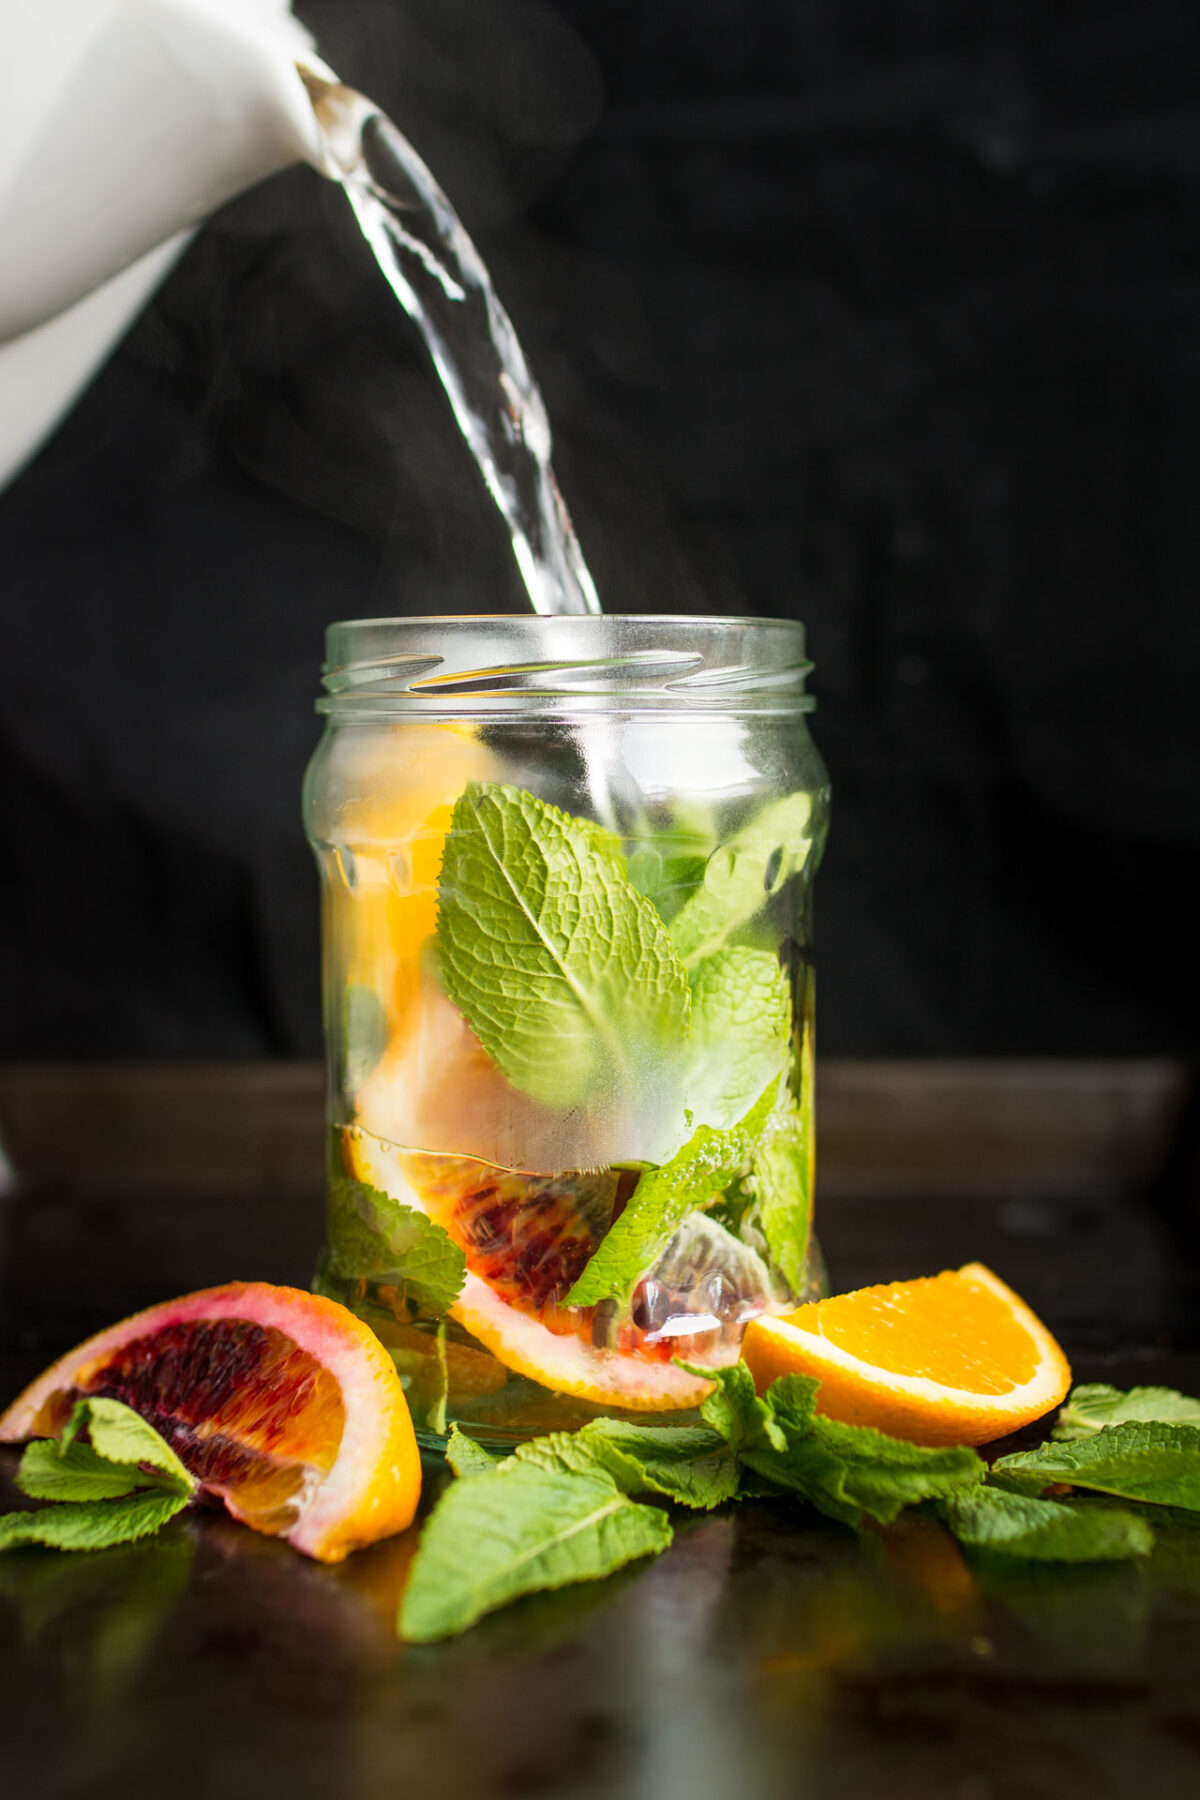 A pitcher of hot water being poured into a glass jar containing sliced oranges and fresh mint sprigs.